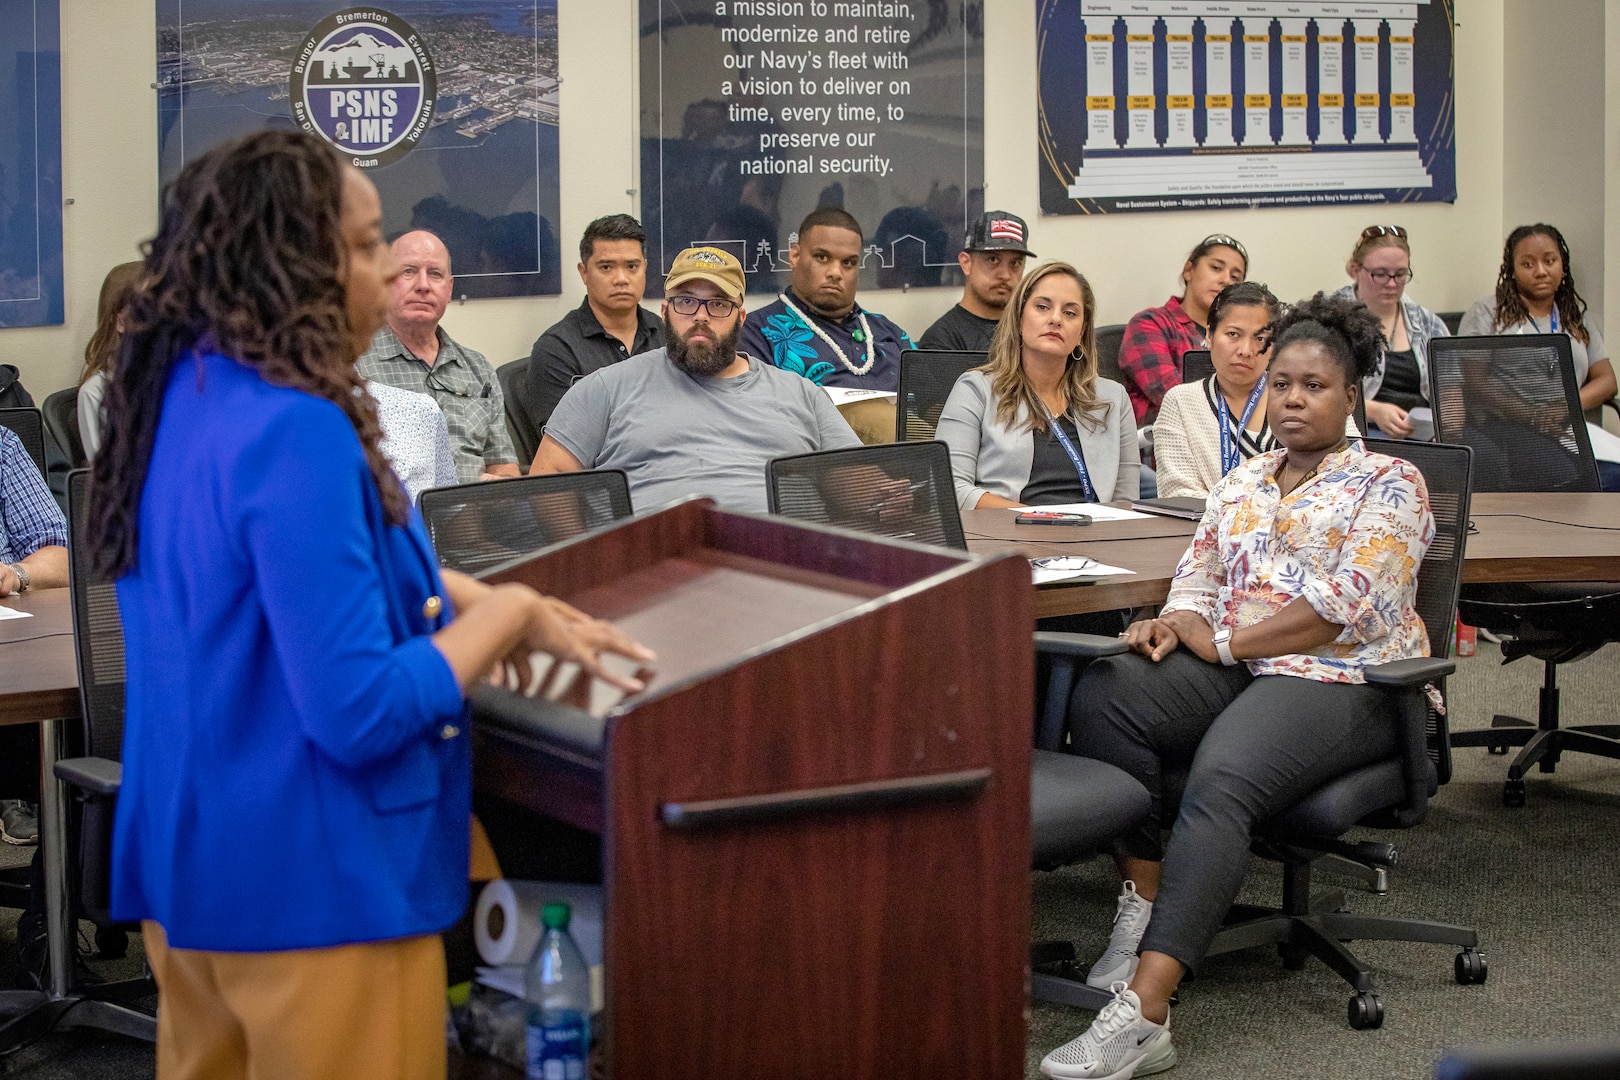 Black, Indigenous and People of Color (BIPOC) Employee Resource Group co-chair Ashley Jackson addresses members of the newly formed ERG Aug. 3, 2023, during its first monthly meeting in the Horseshoe Conference Room in Building 850 at Puget Sound Naval Shipyard & Intermediate Maintenance Facility in Bremerton, Washington. The ERG was formed to be inclusive of multiple cultural groups represented at the shipyard. (U.S. Navy photo by Scott Hansen)